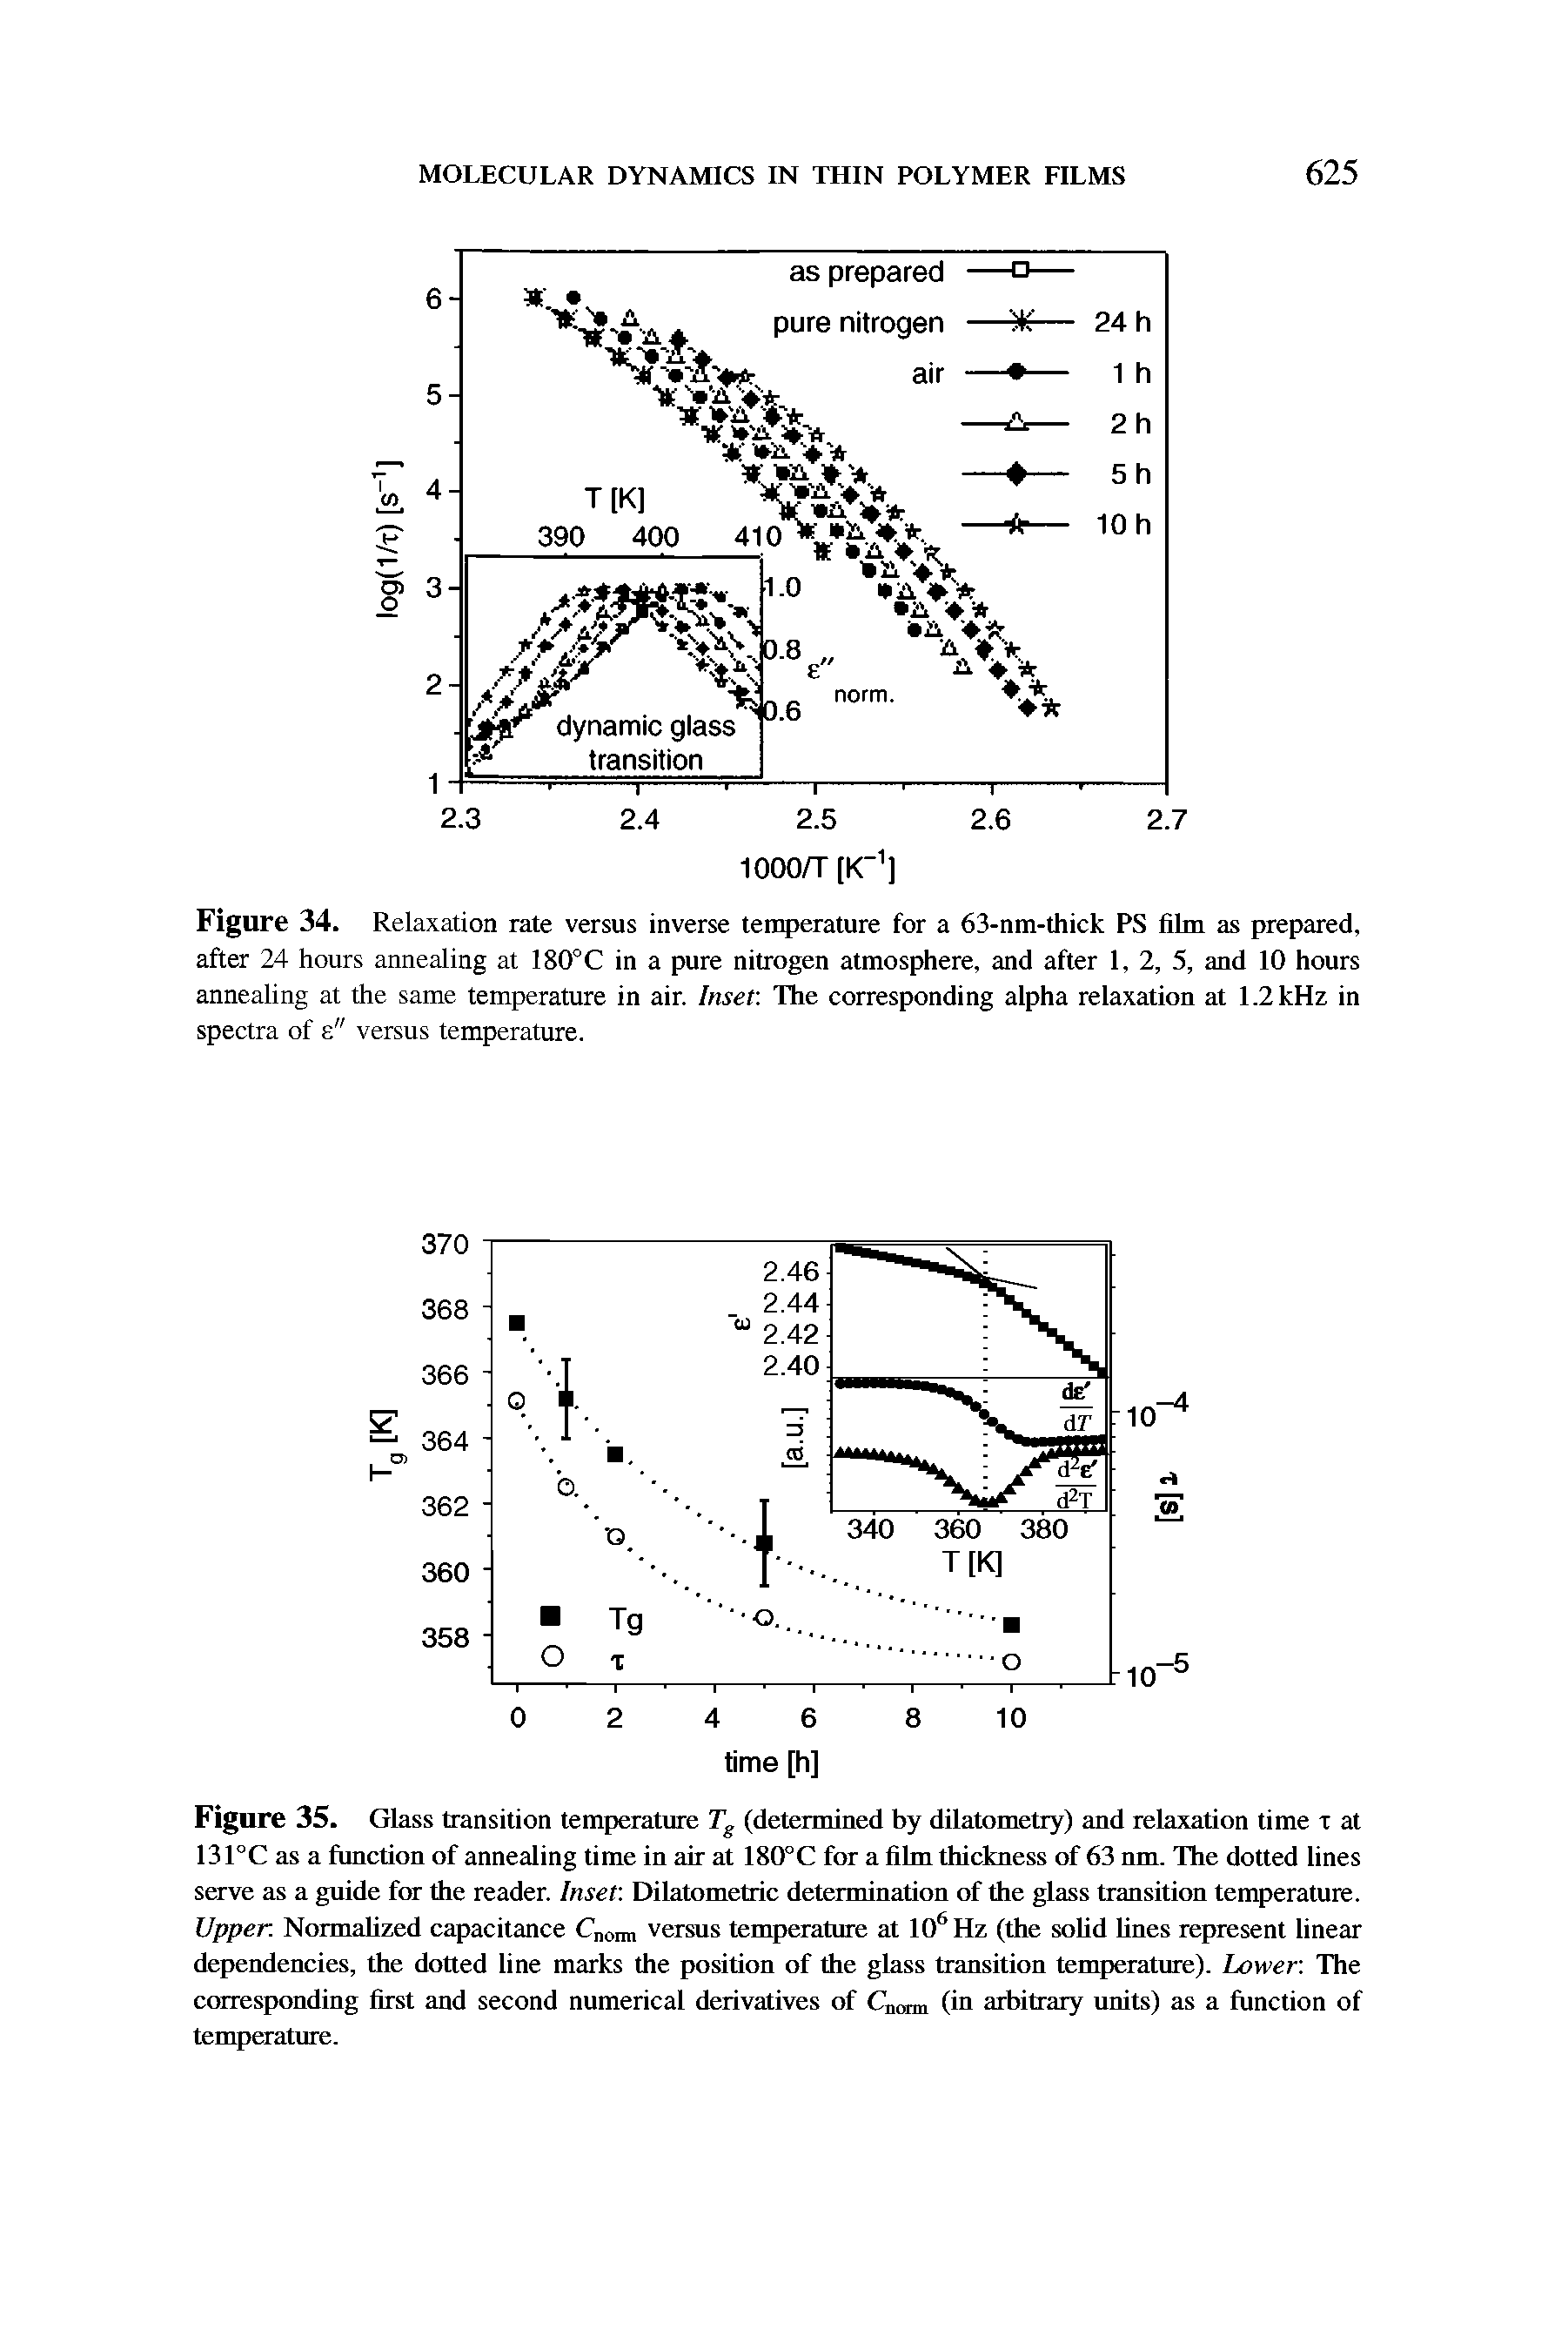 Figure 35. Glass transition temperature 7., (determined by dilatometry) and relaxation time r at 131°C as a function of annealing time in air at 180°C for a film thickness of 63 nm. The dotted lines serve as a guide for the reader. Inset Dilatometric determination of the glass transition temperature. Upper. Normalized capacitance Cn0nn versus temperature at 106Hz (the solid lines represent linear dependencies, the dotted line marks the position of the glass transition temperature). Lower. The corresponding first and second numerical derivatives of Cnonn (in arbitrary units) as a function of temperature.